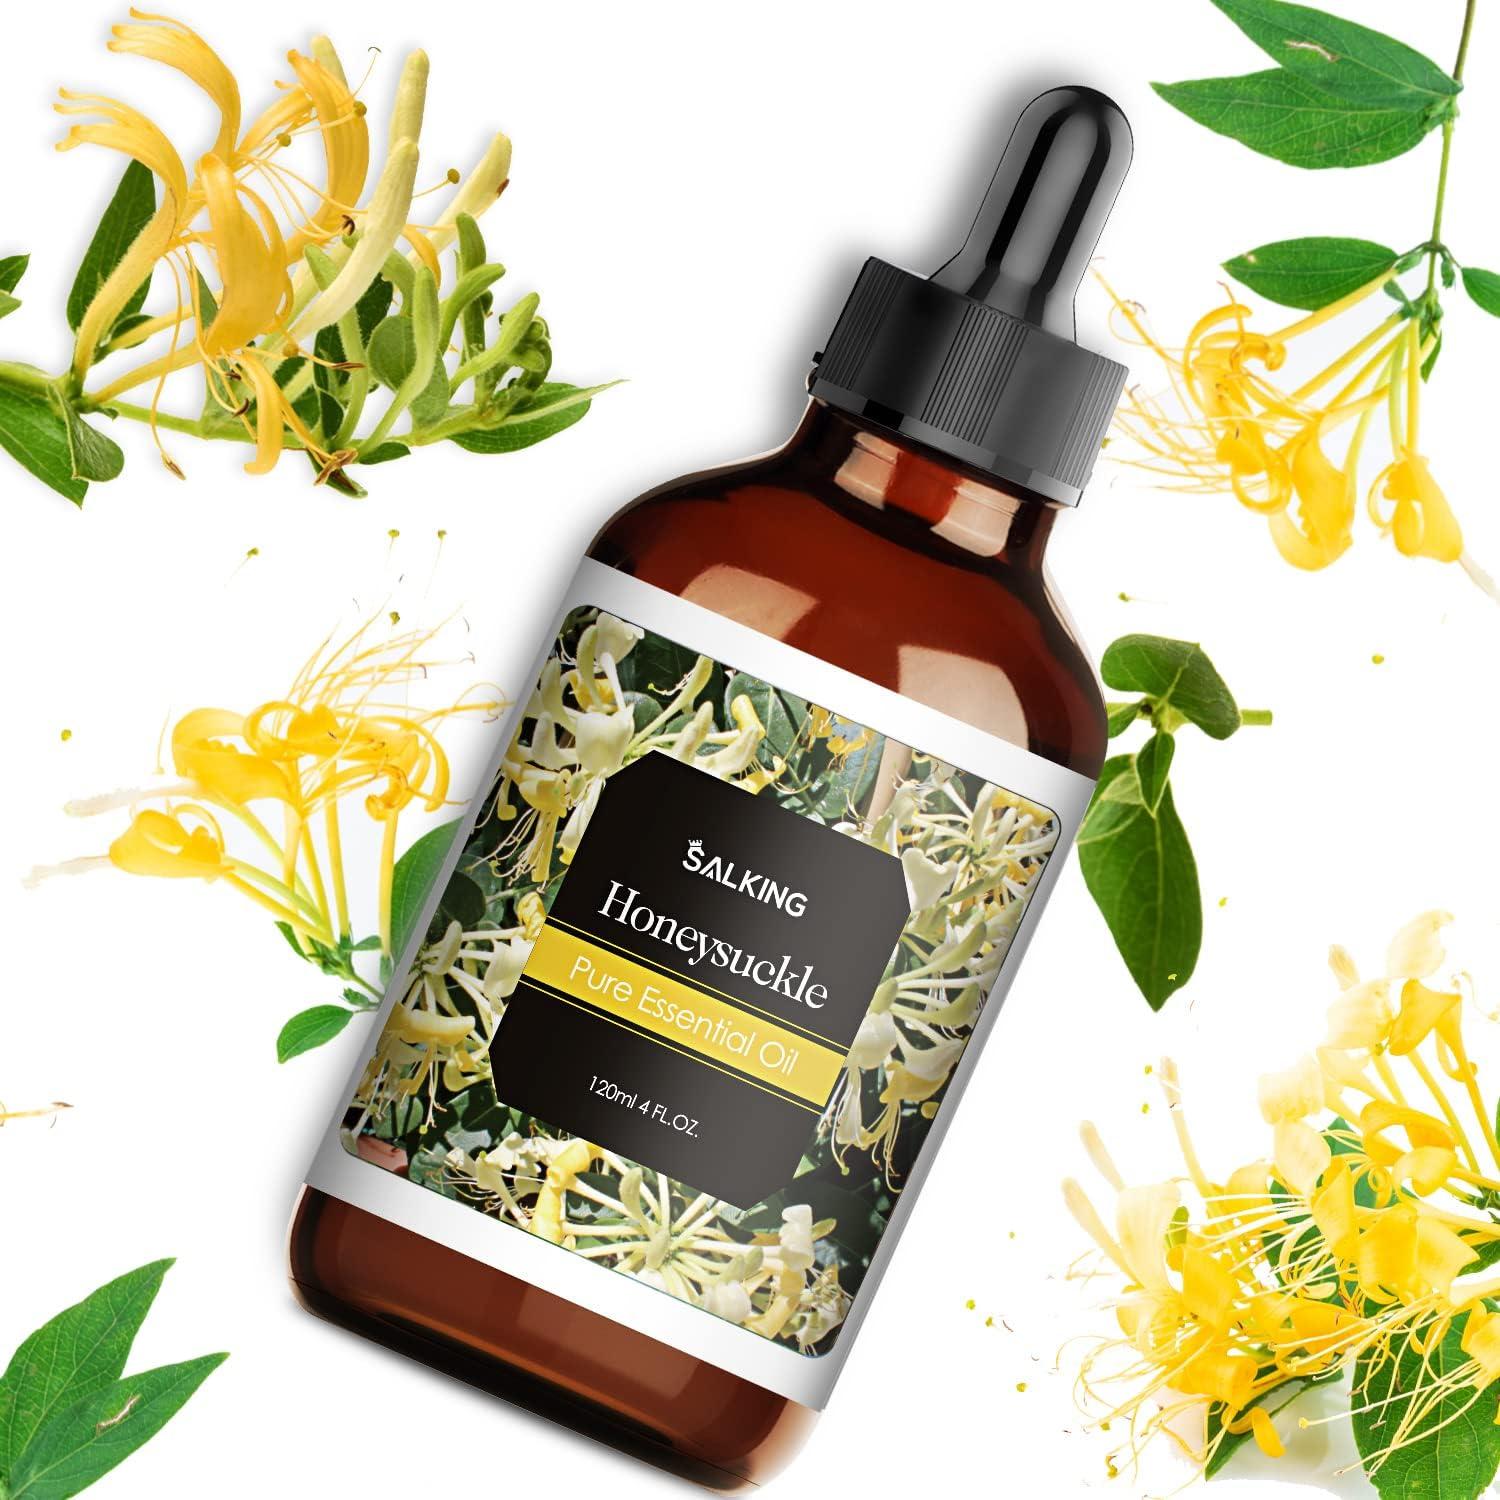 Honeysuckle Essential Oil 4 Fl Oz (120ml) - Pure and Natural